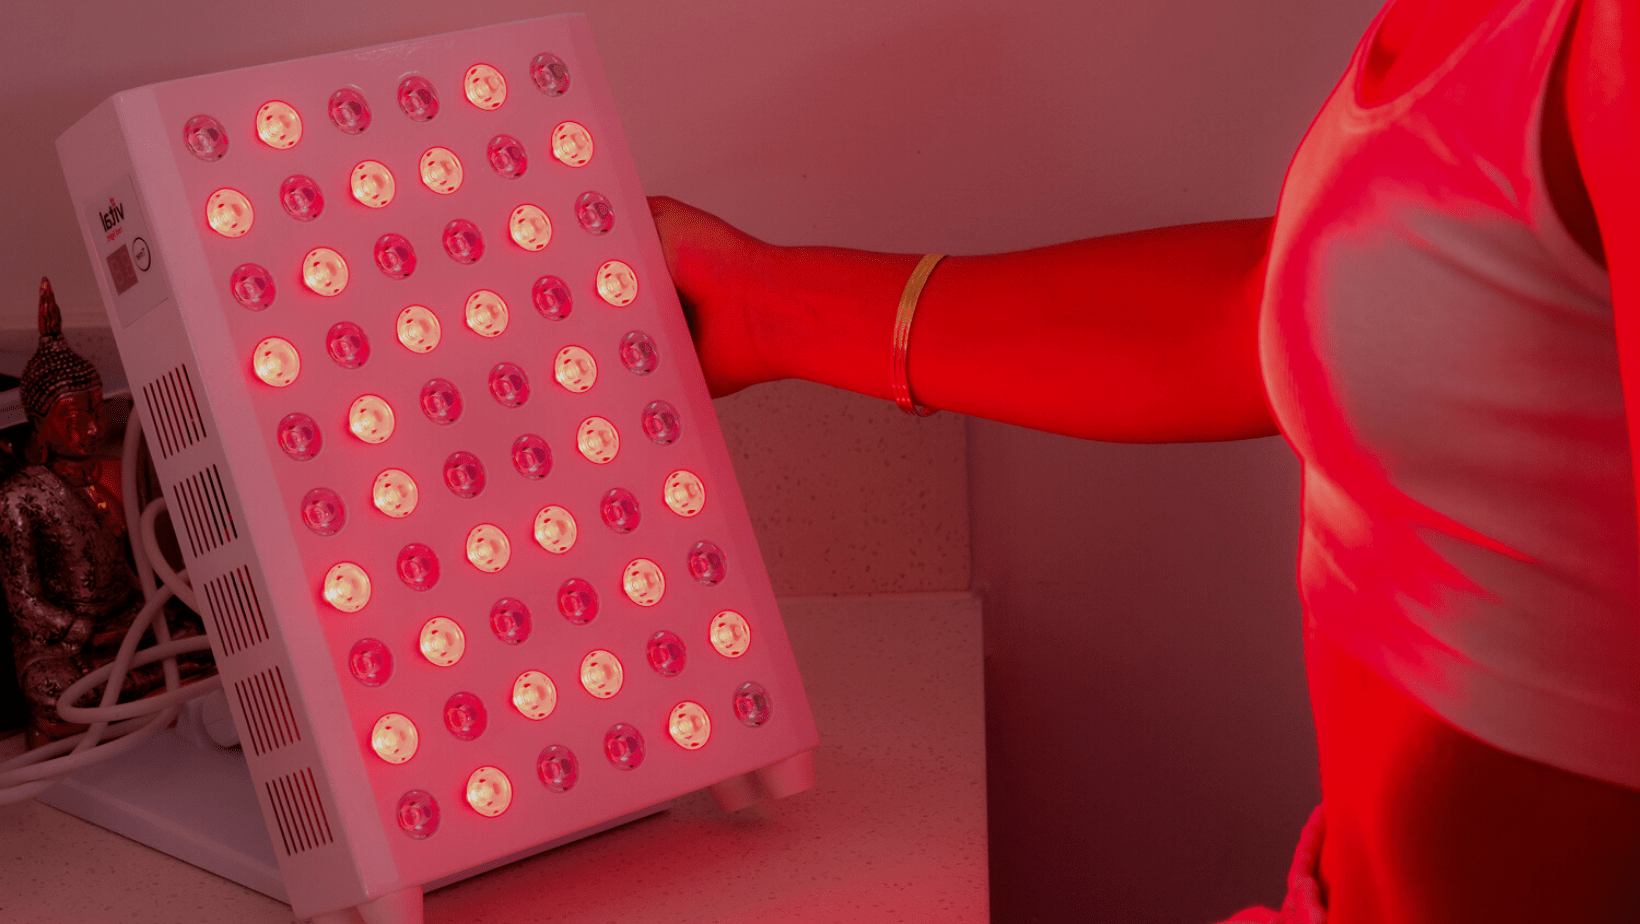 How to use red light therapy at-home